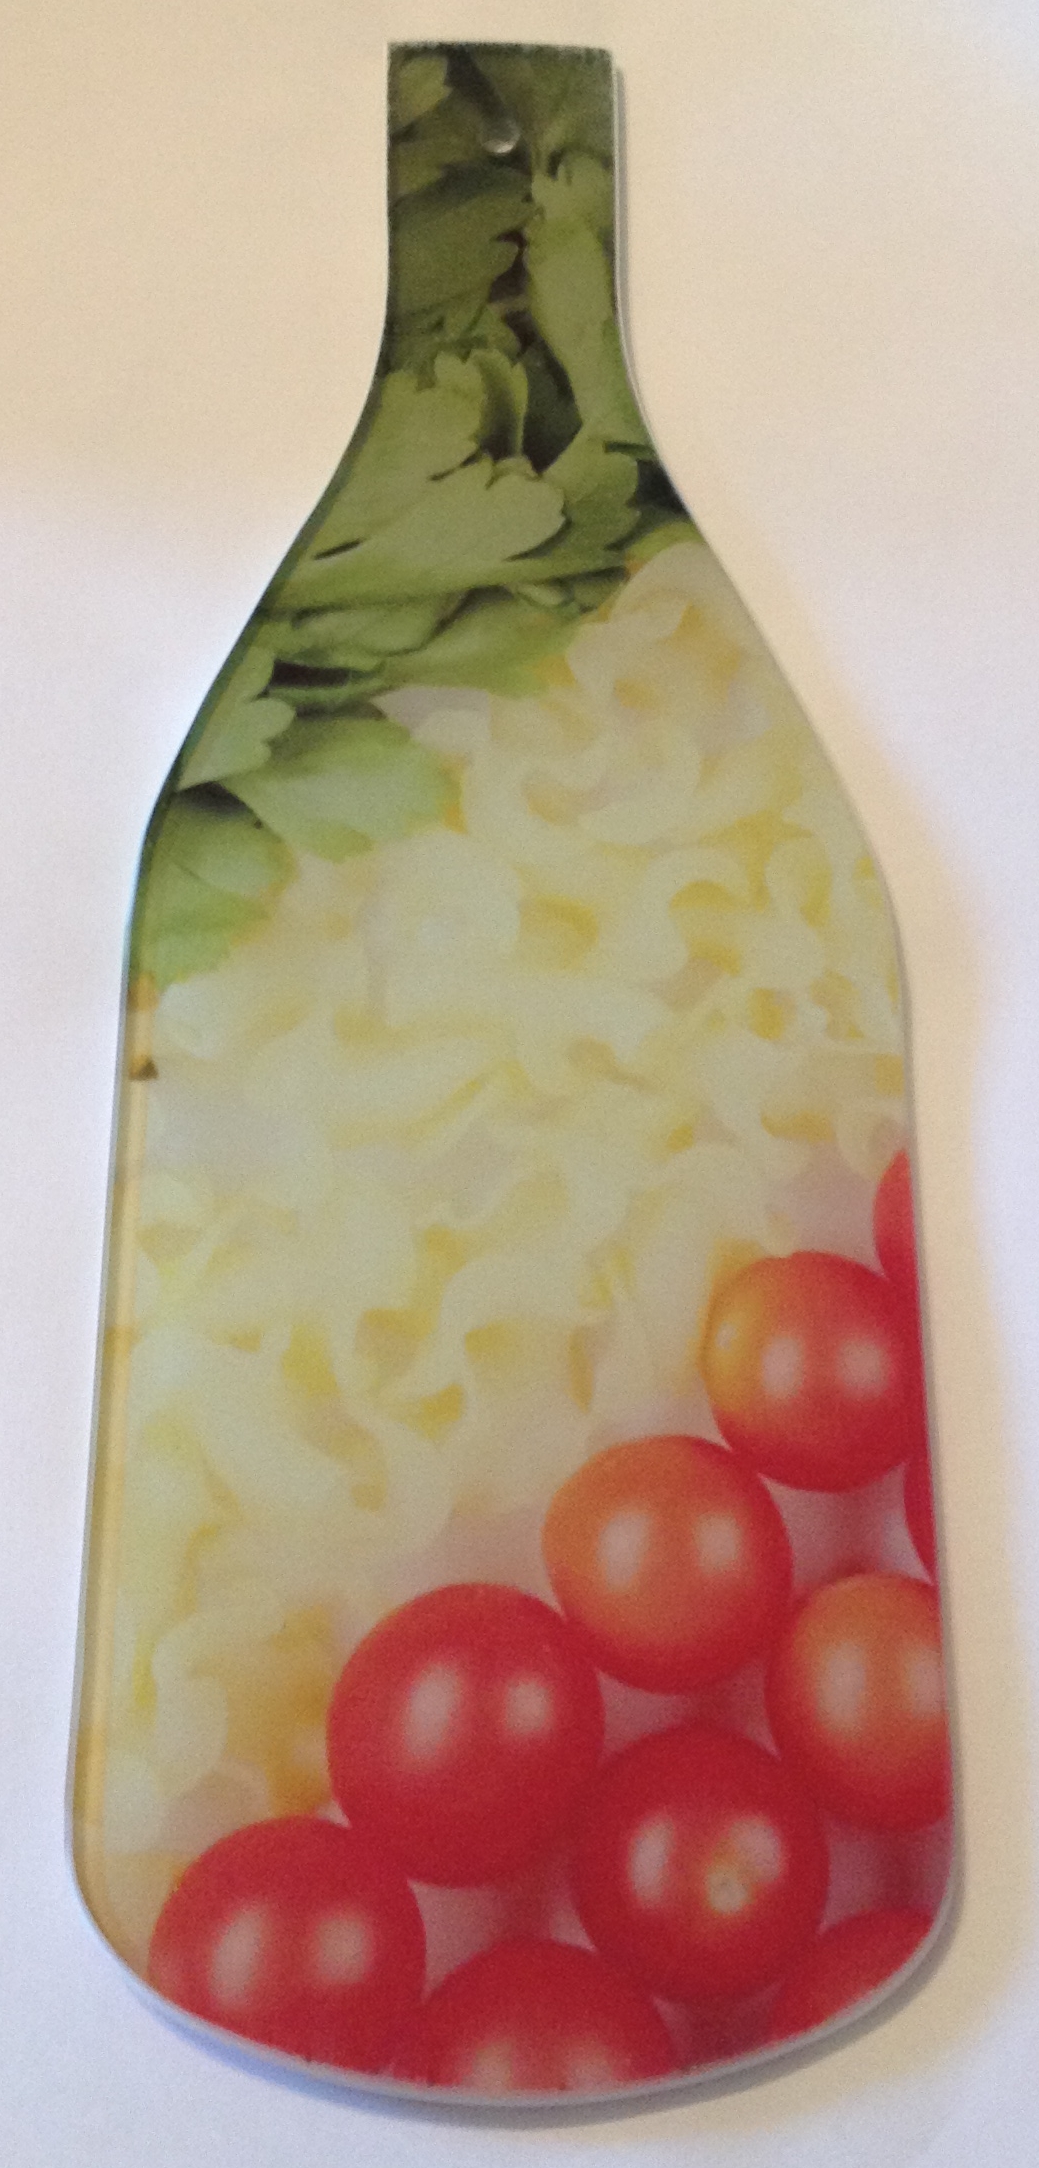 Italian Food made with sublimation printing